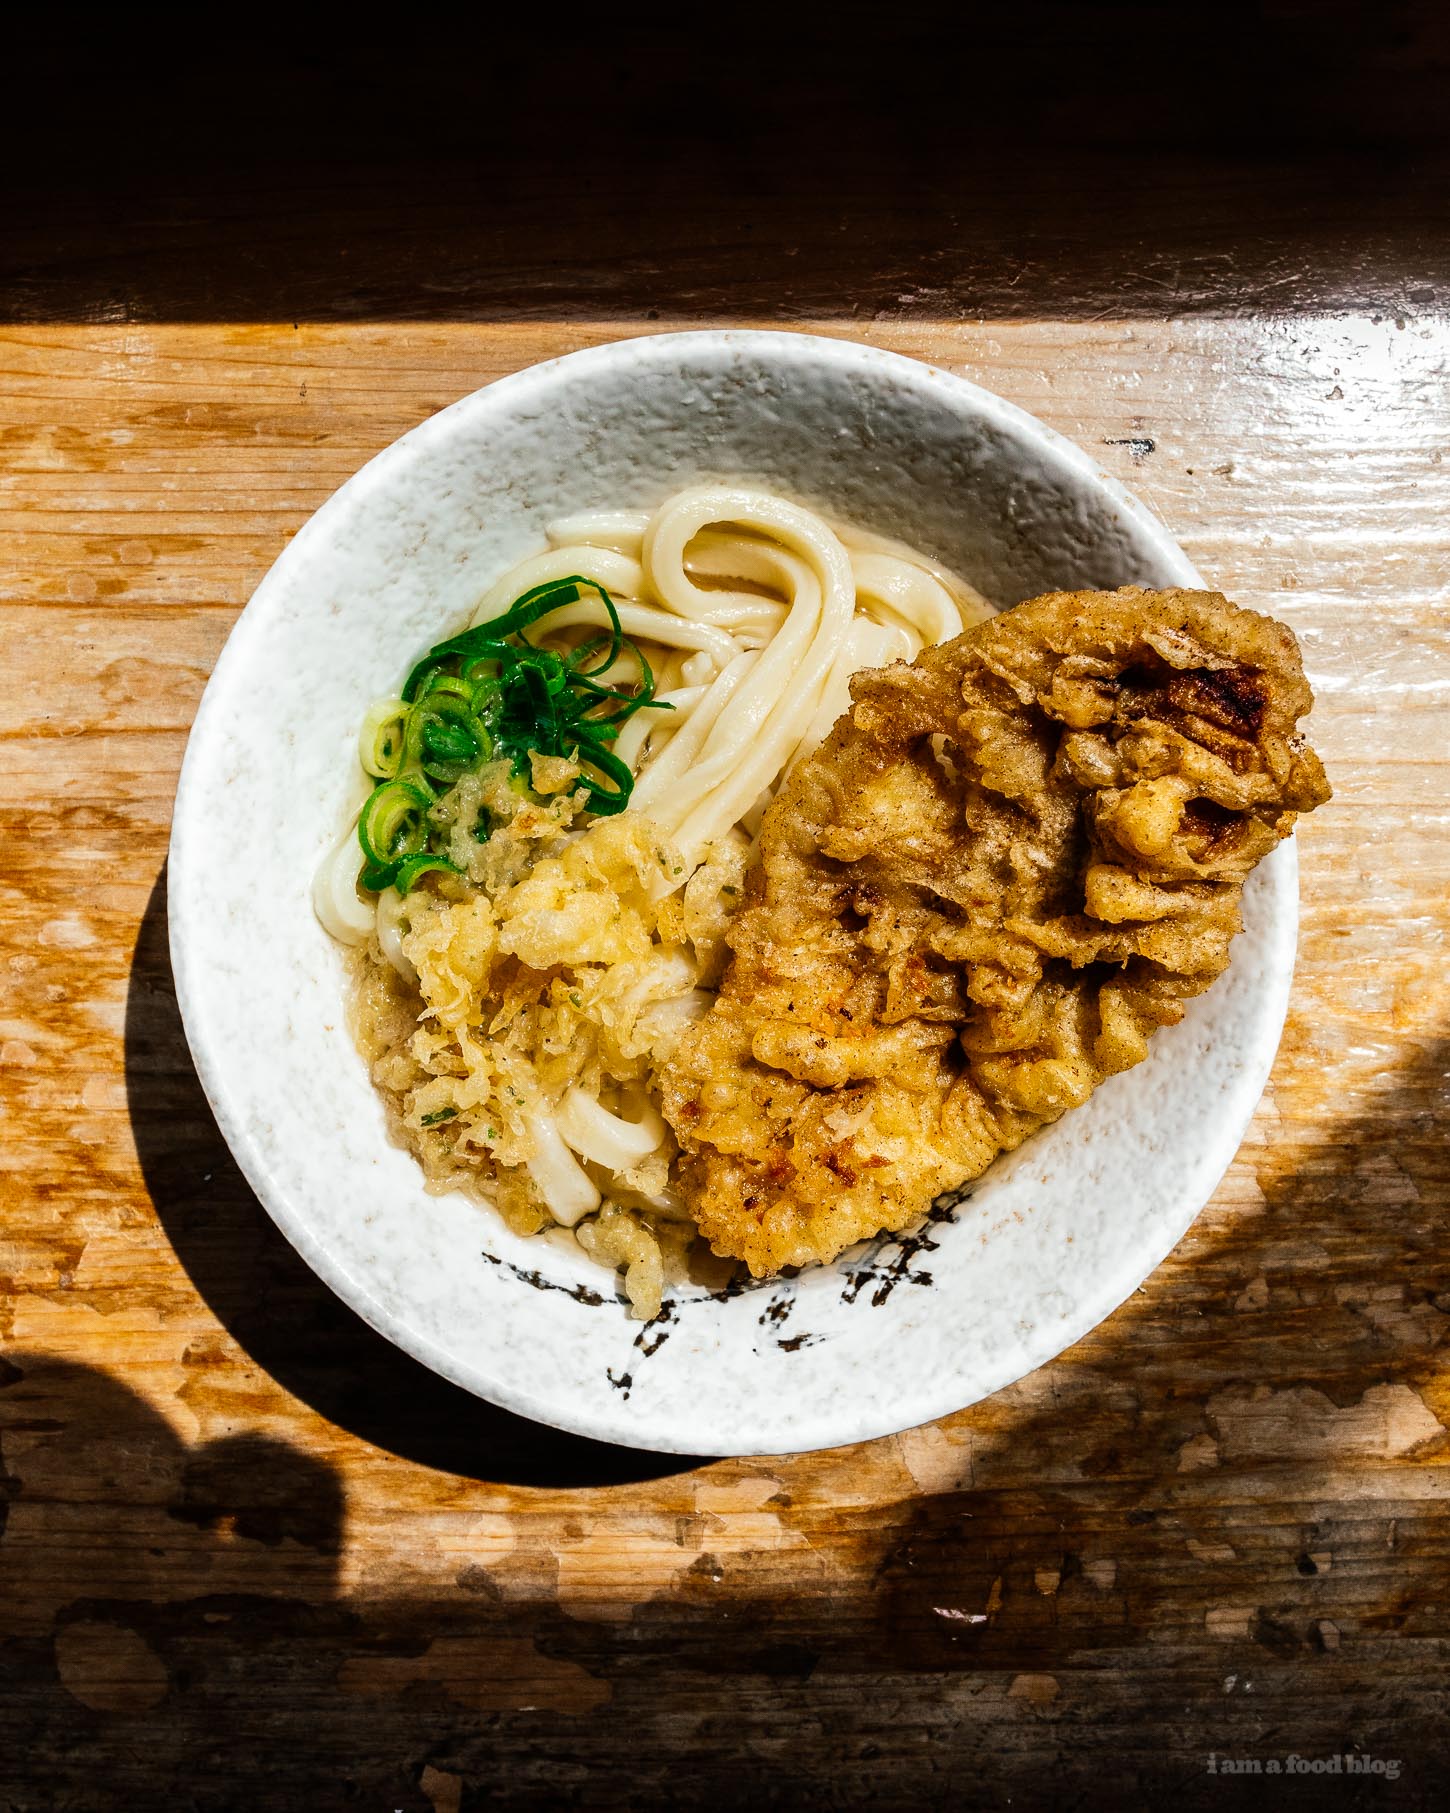 Jotou Udon Review | www.iamafoodblog.com